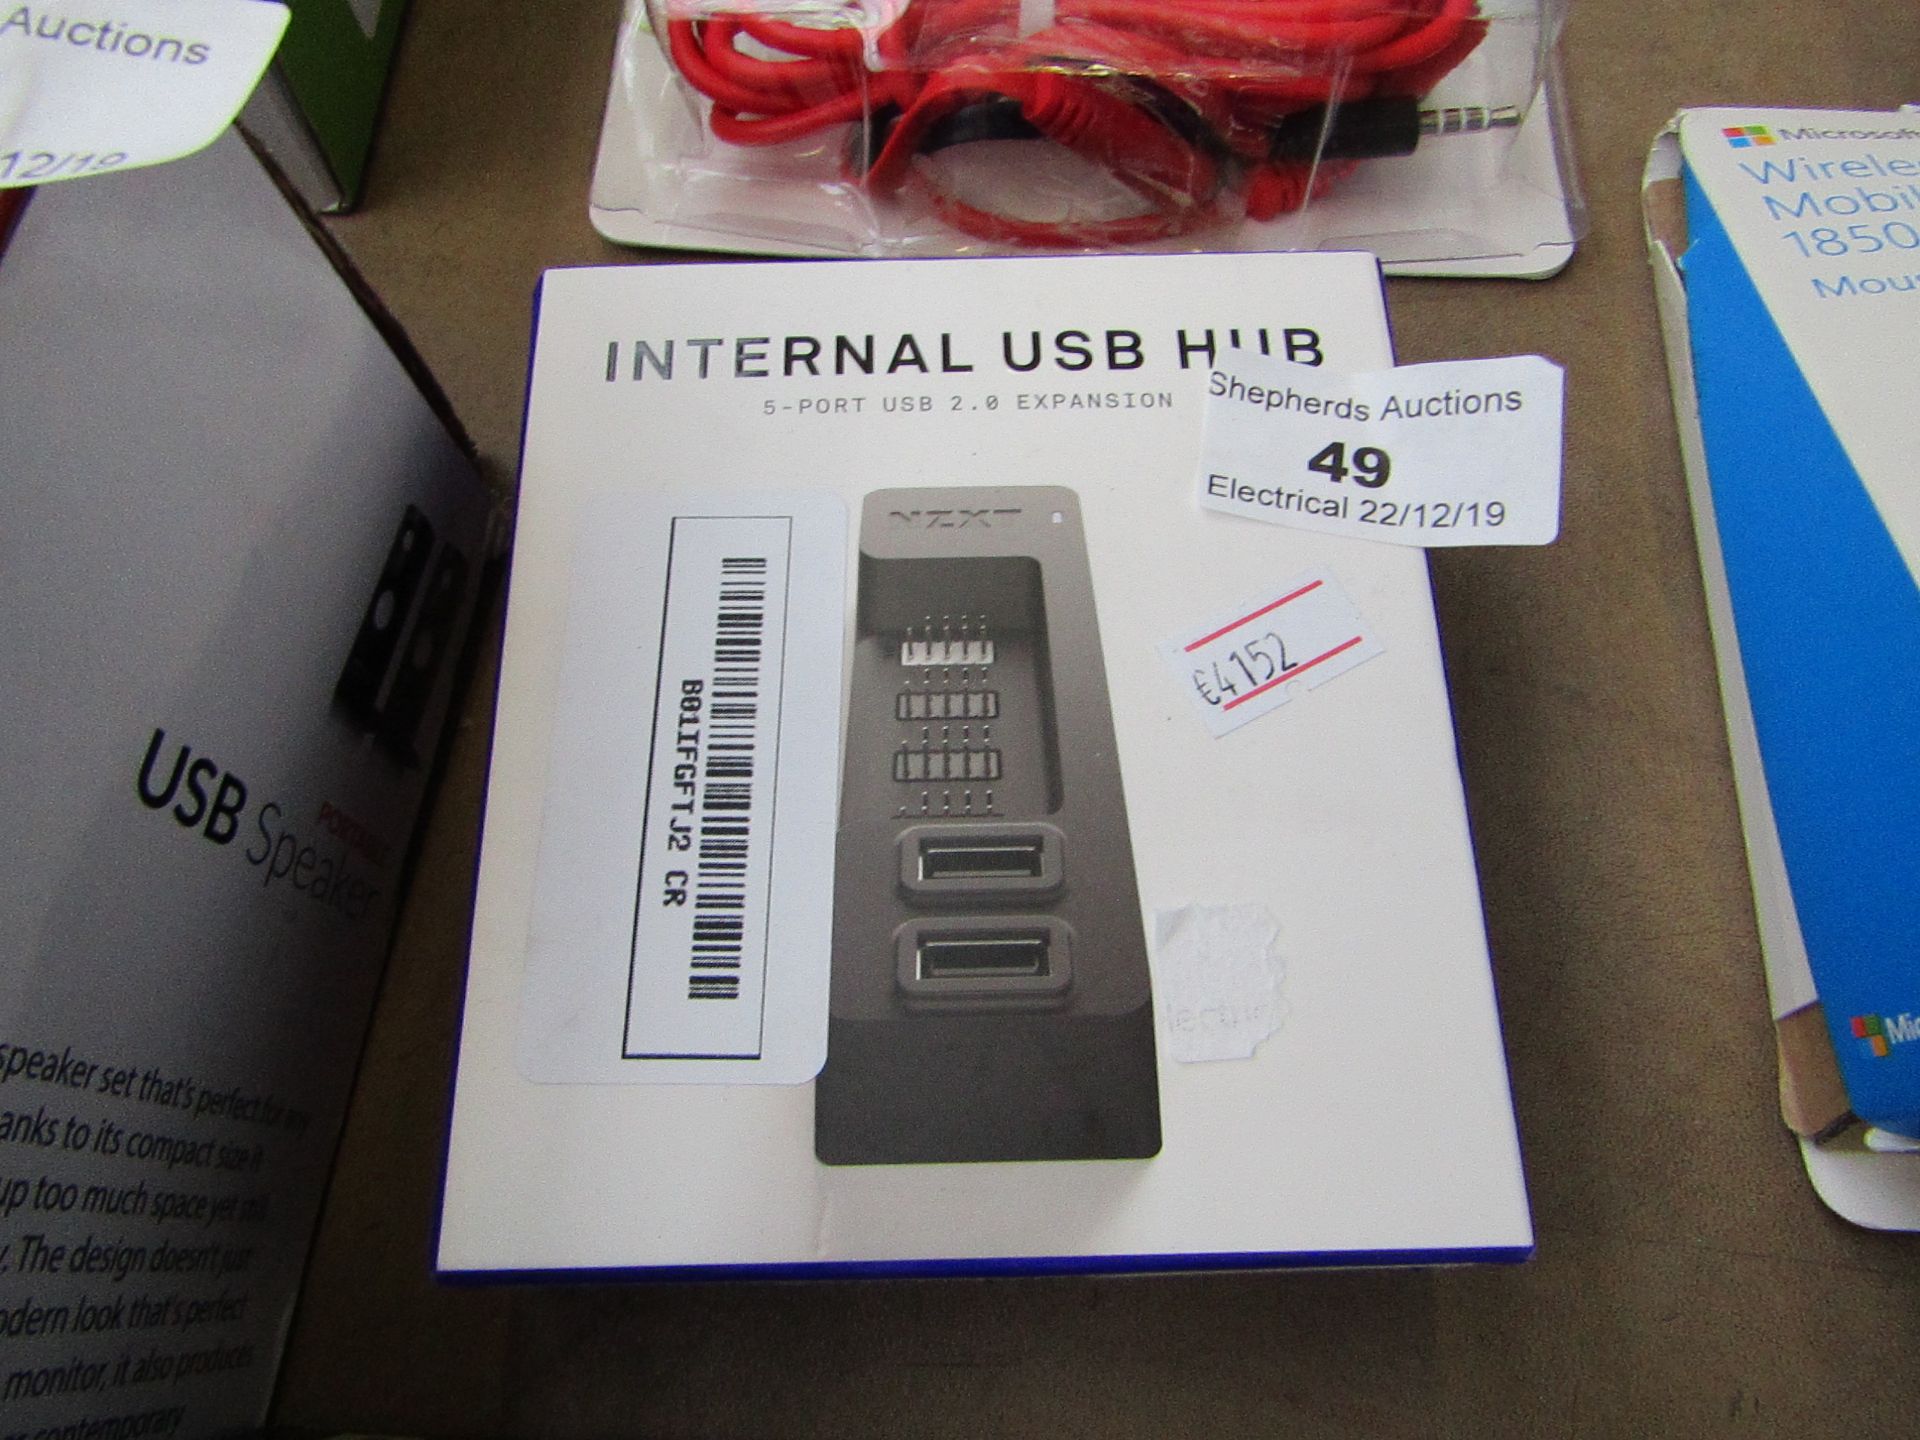 Internal USB HUB - 5-port USB 2.0 expansion, untested and boxed.